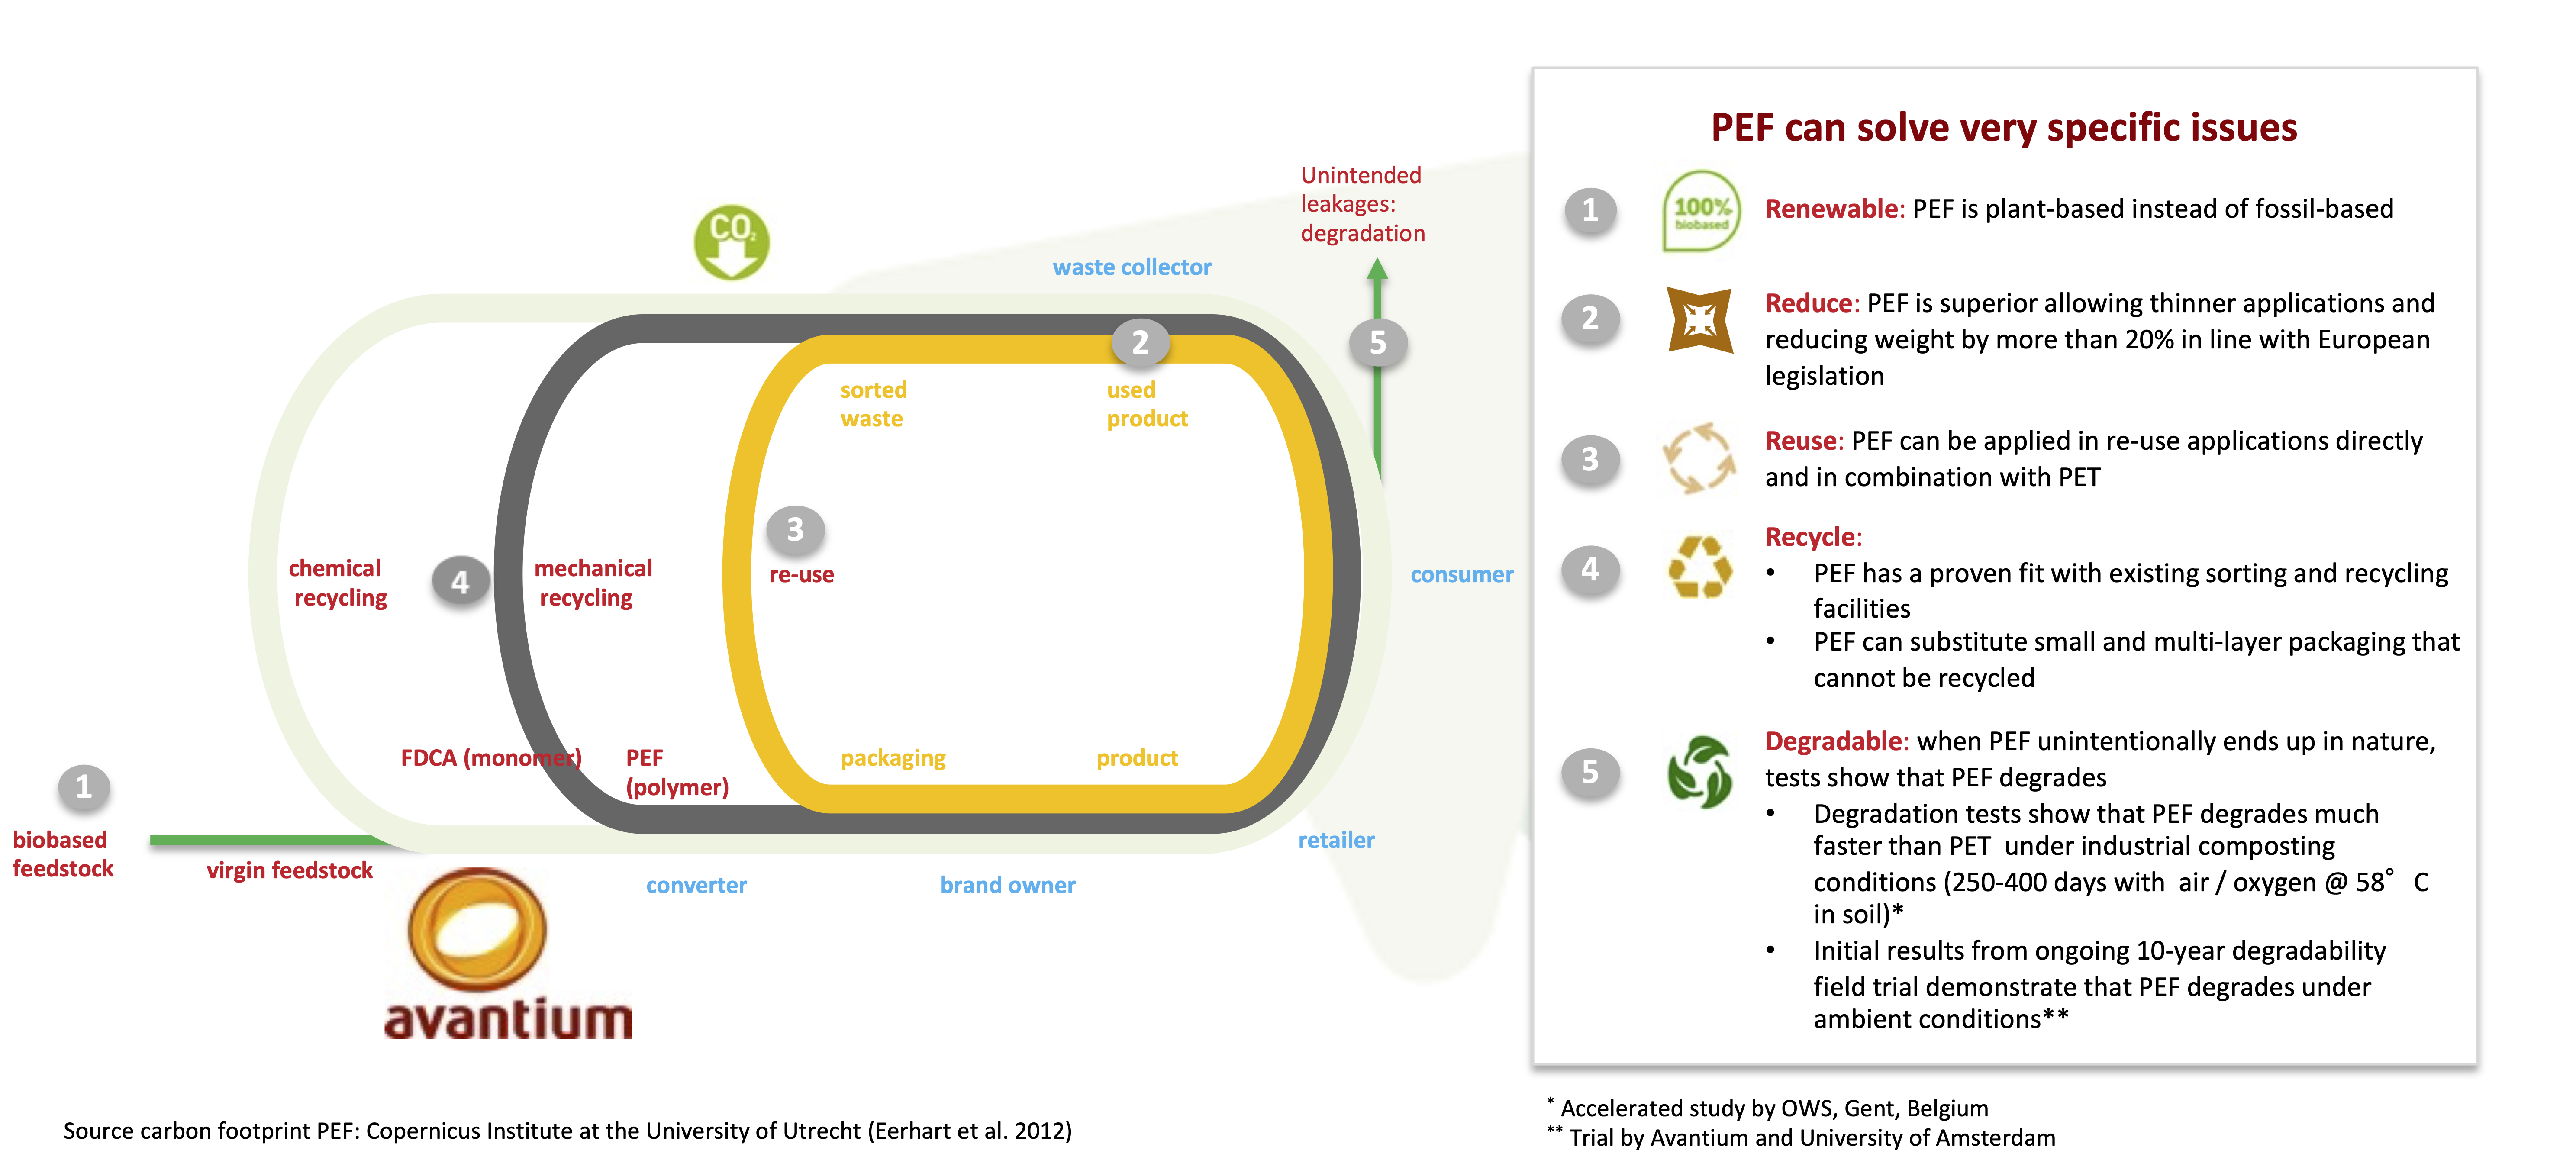 Graphic: PEF can solve very specific issues, it is renewable, reusable, recyclable and degradable under certain conditions